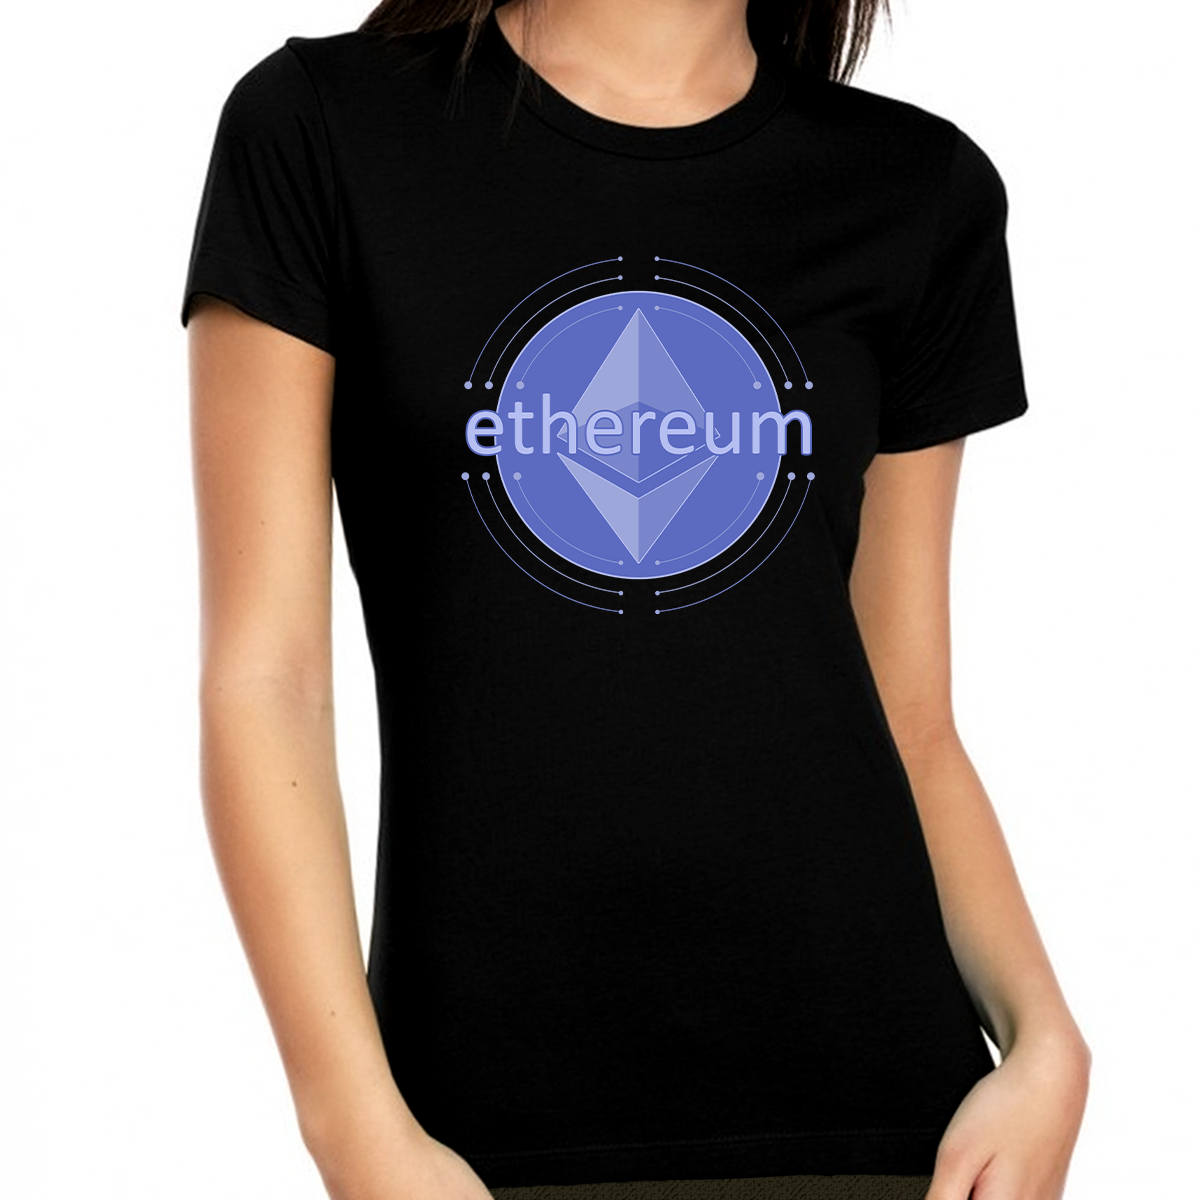 Ethereum Shirts for Women Crypto Gifts Ethereum Shirt Crypto Shirt Ethereum Cryptocurrency Ethereum Shirt